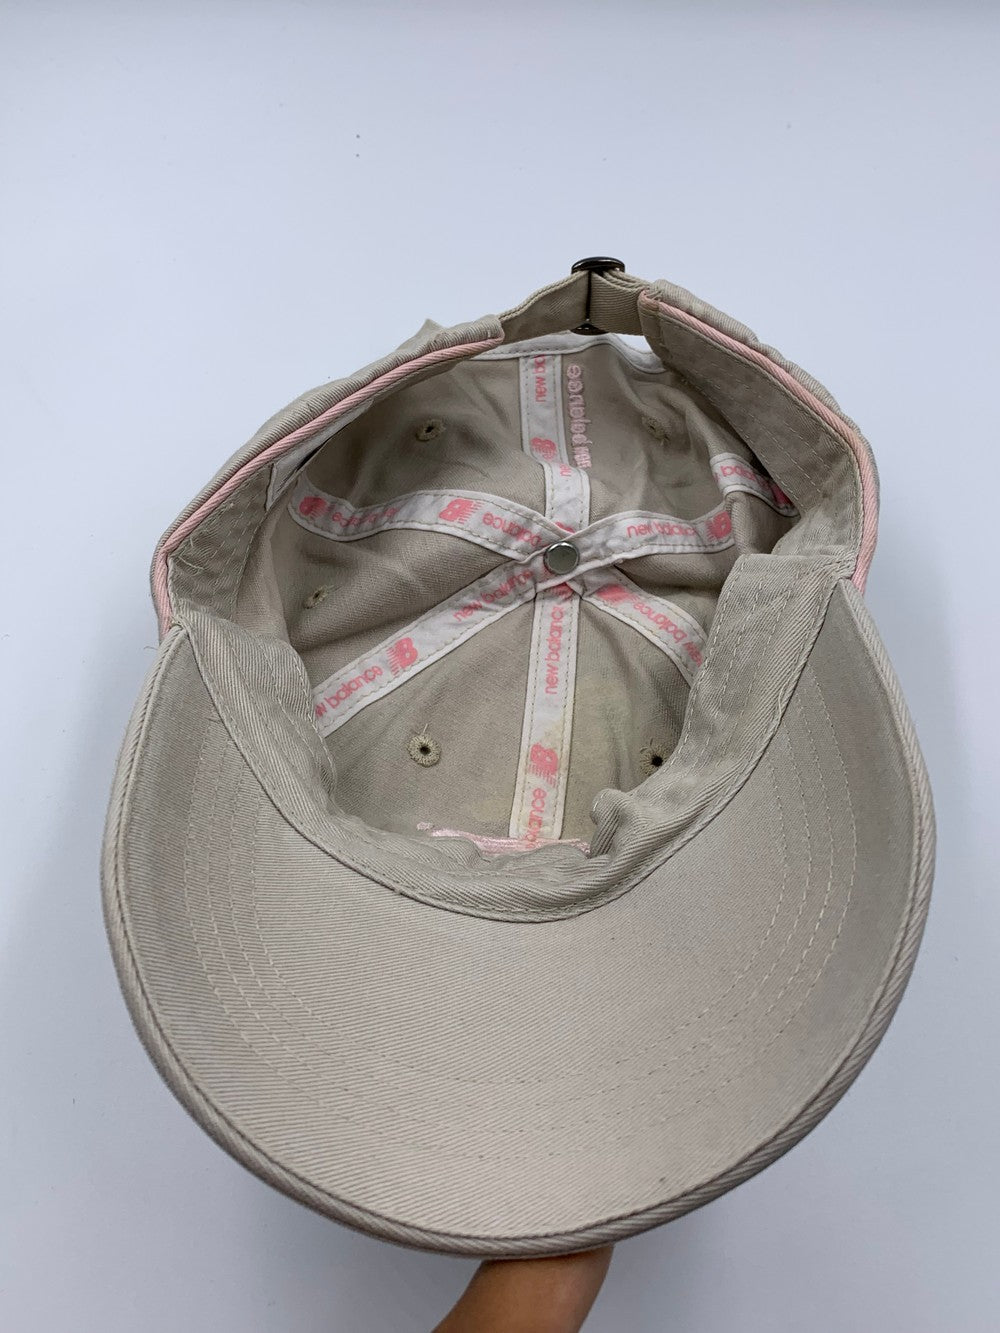 New Balance Branded Original Branded Caps For Woman